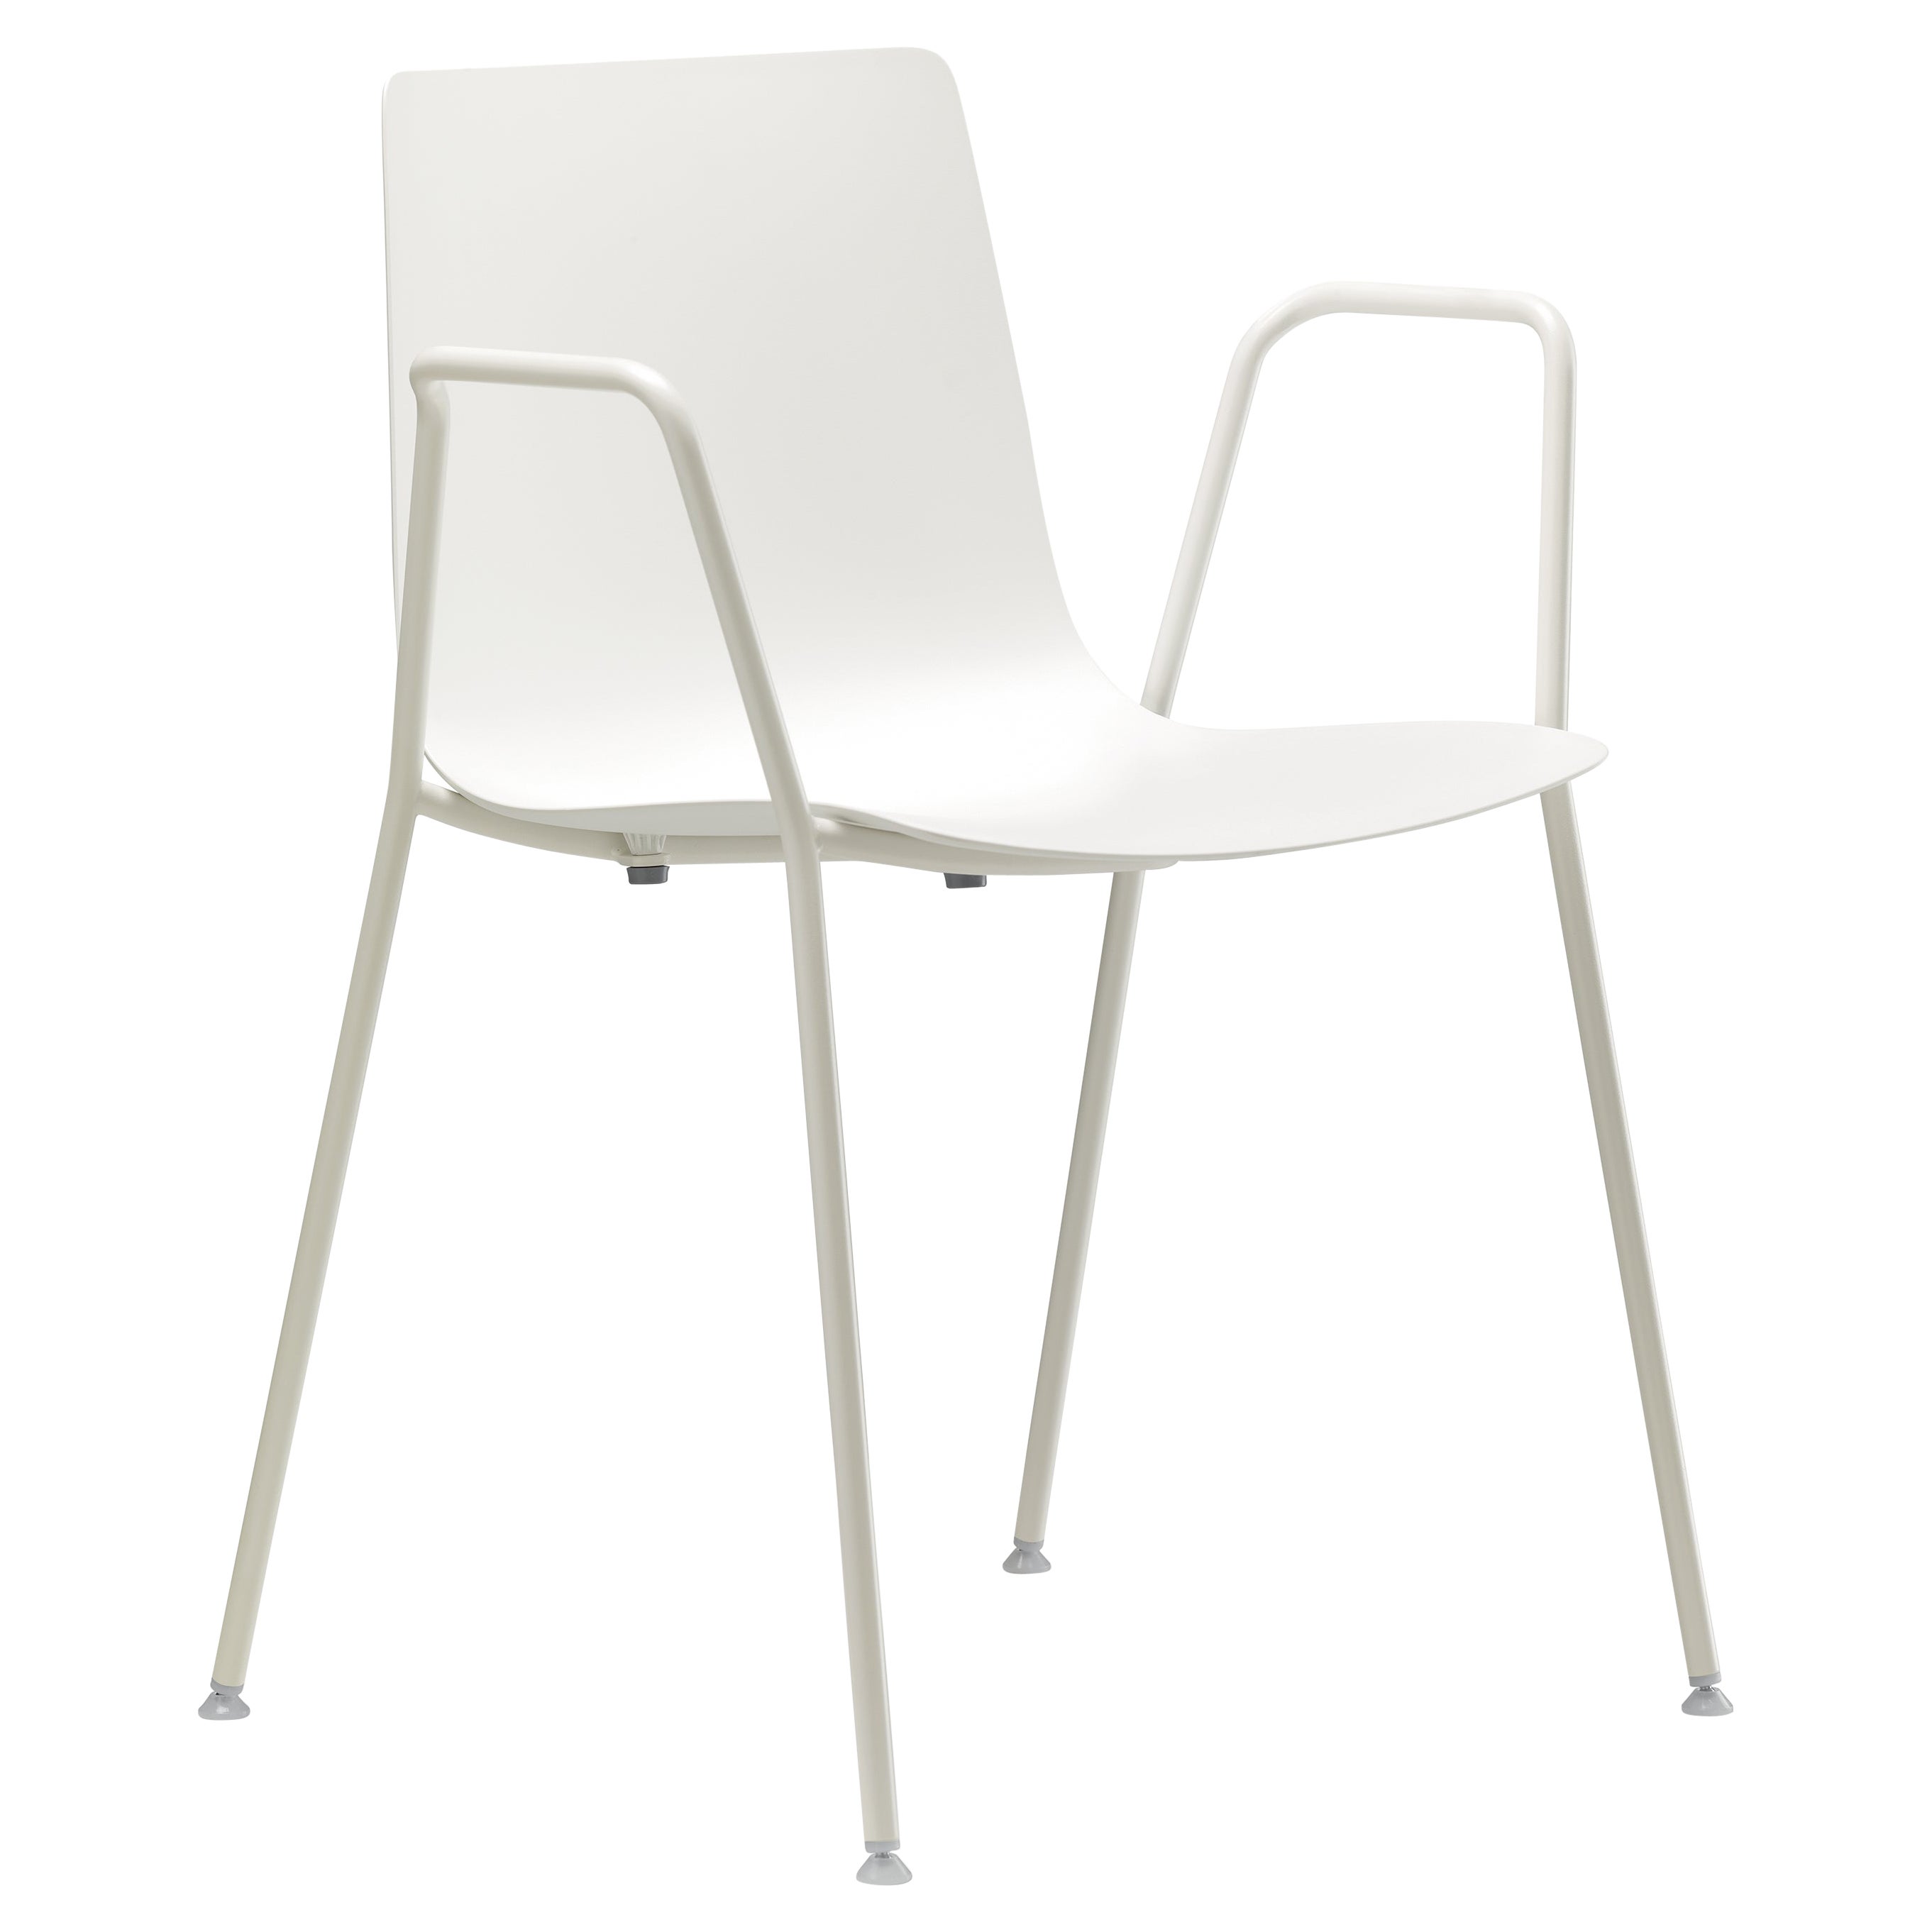 Alias 89B Slim Sledge Armchair in White Polypropylene Seat & Lacquered Frame For Sale